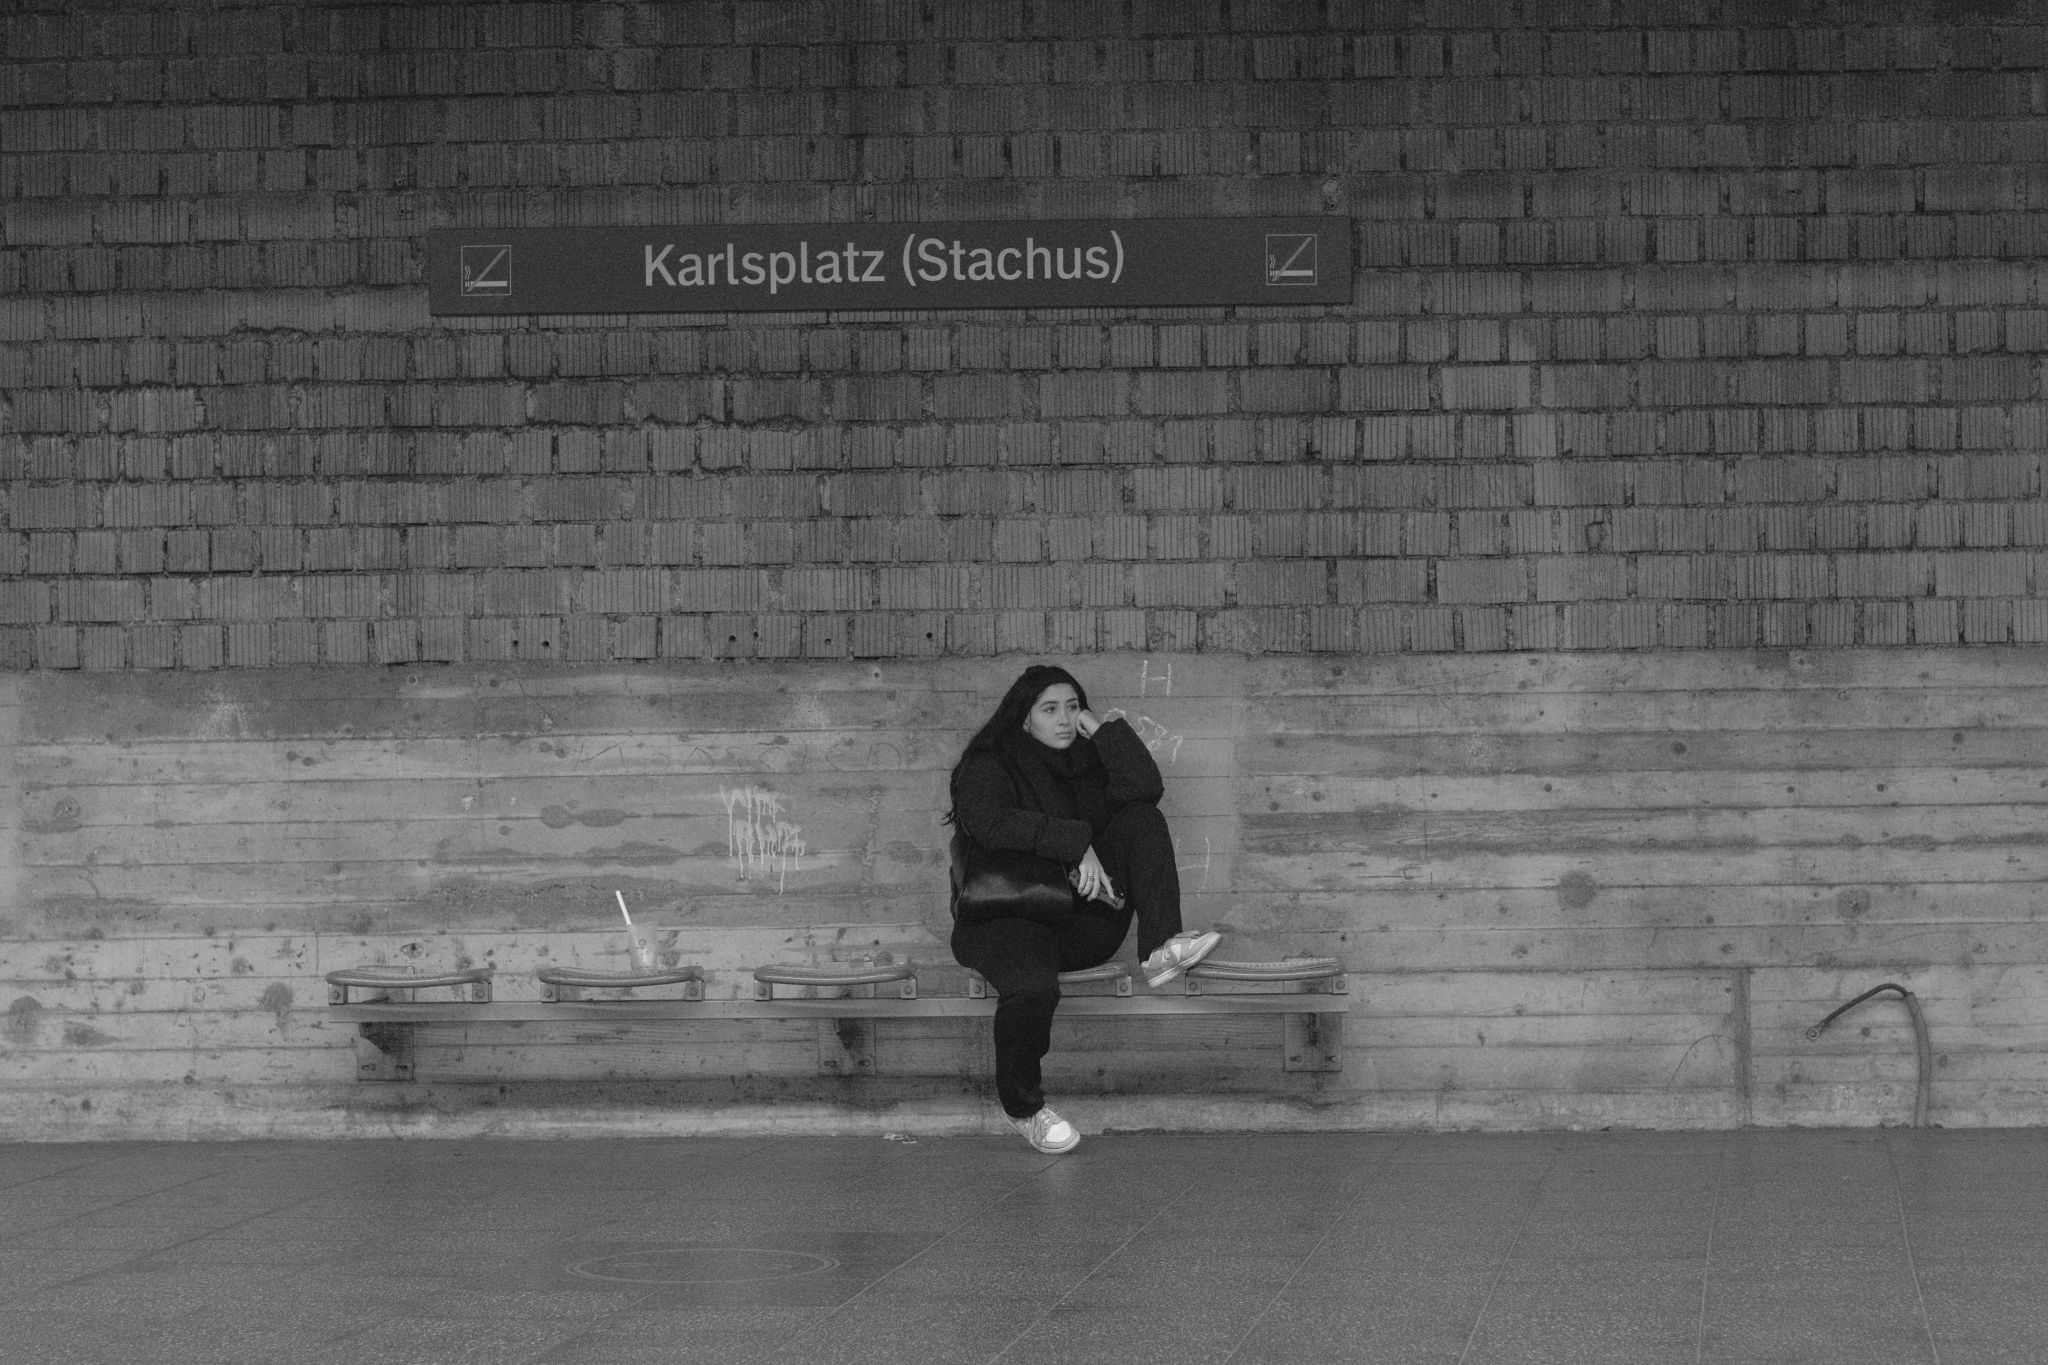 A woman sitting on a bench in front of a rough wall on a subway station. A sign above her says "Karlsplatz (Stachus)".